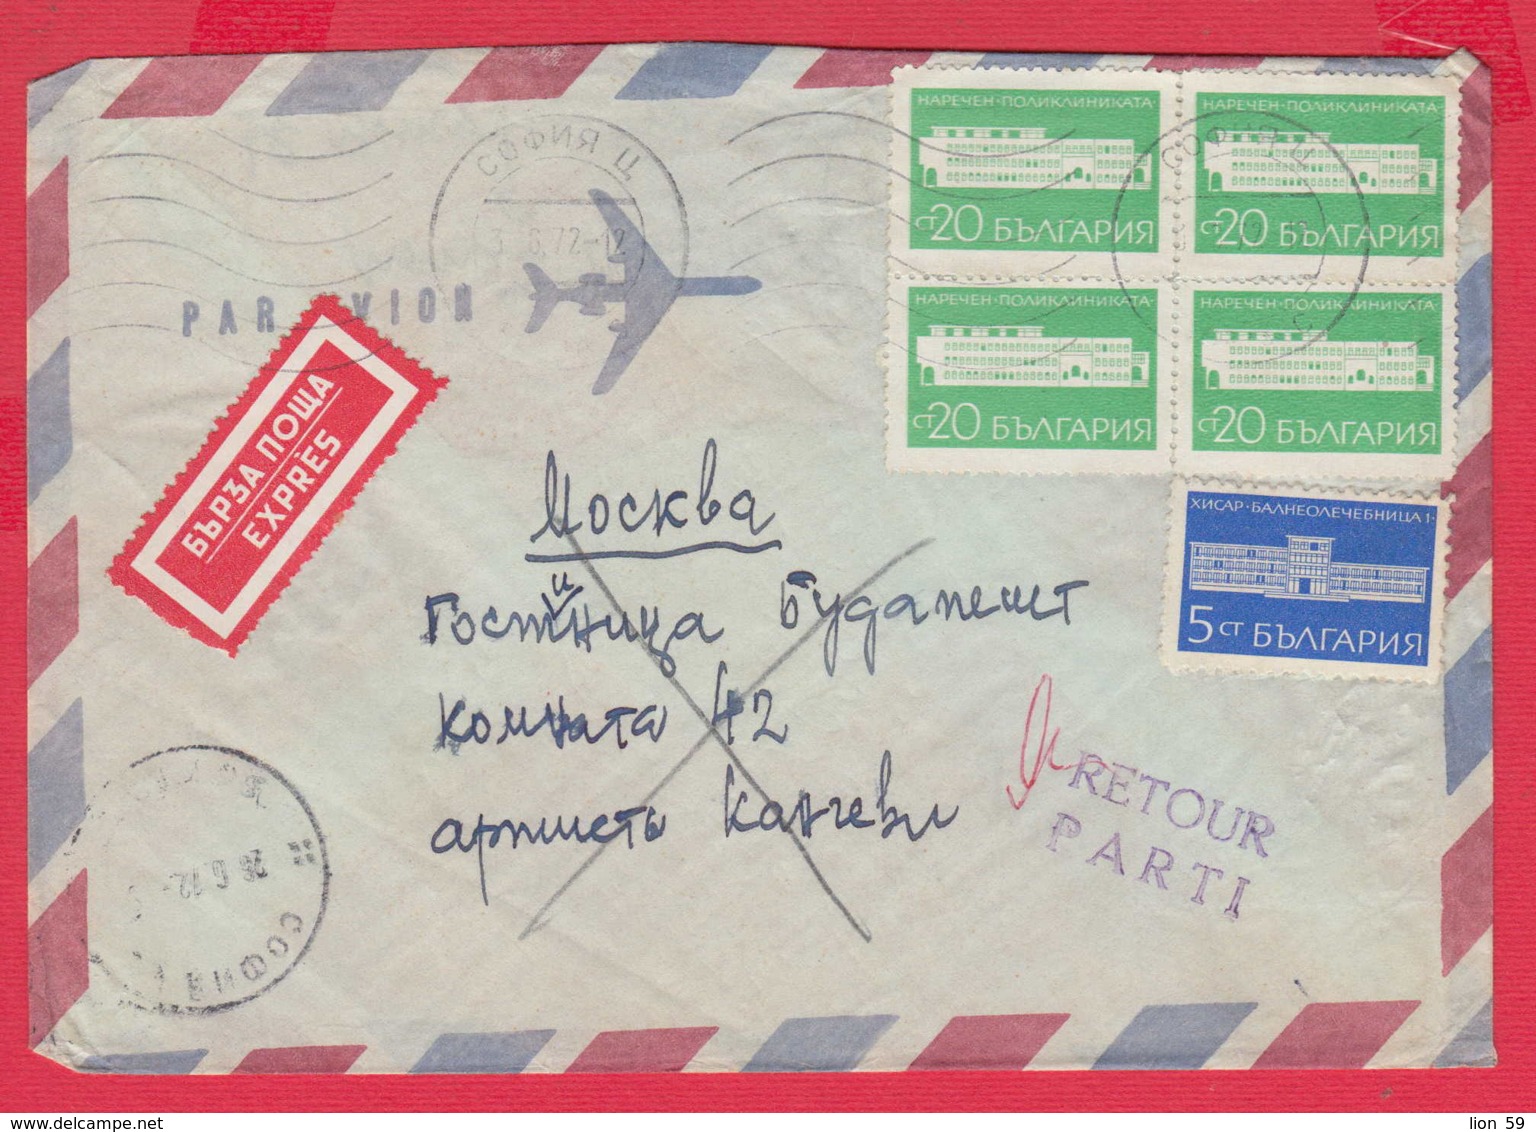 242215 / EXPRES COVER 1972 - 85 St. - Narechen , Hisarya ,SOFIA - MOSCOW RUSSIA , RETOUR PARTI  , Bulgaria - Covers & Documents